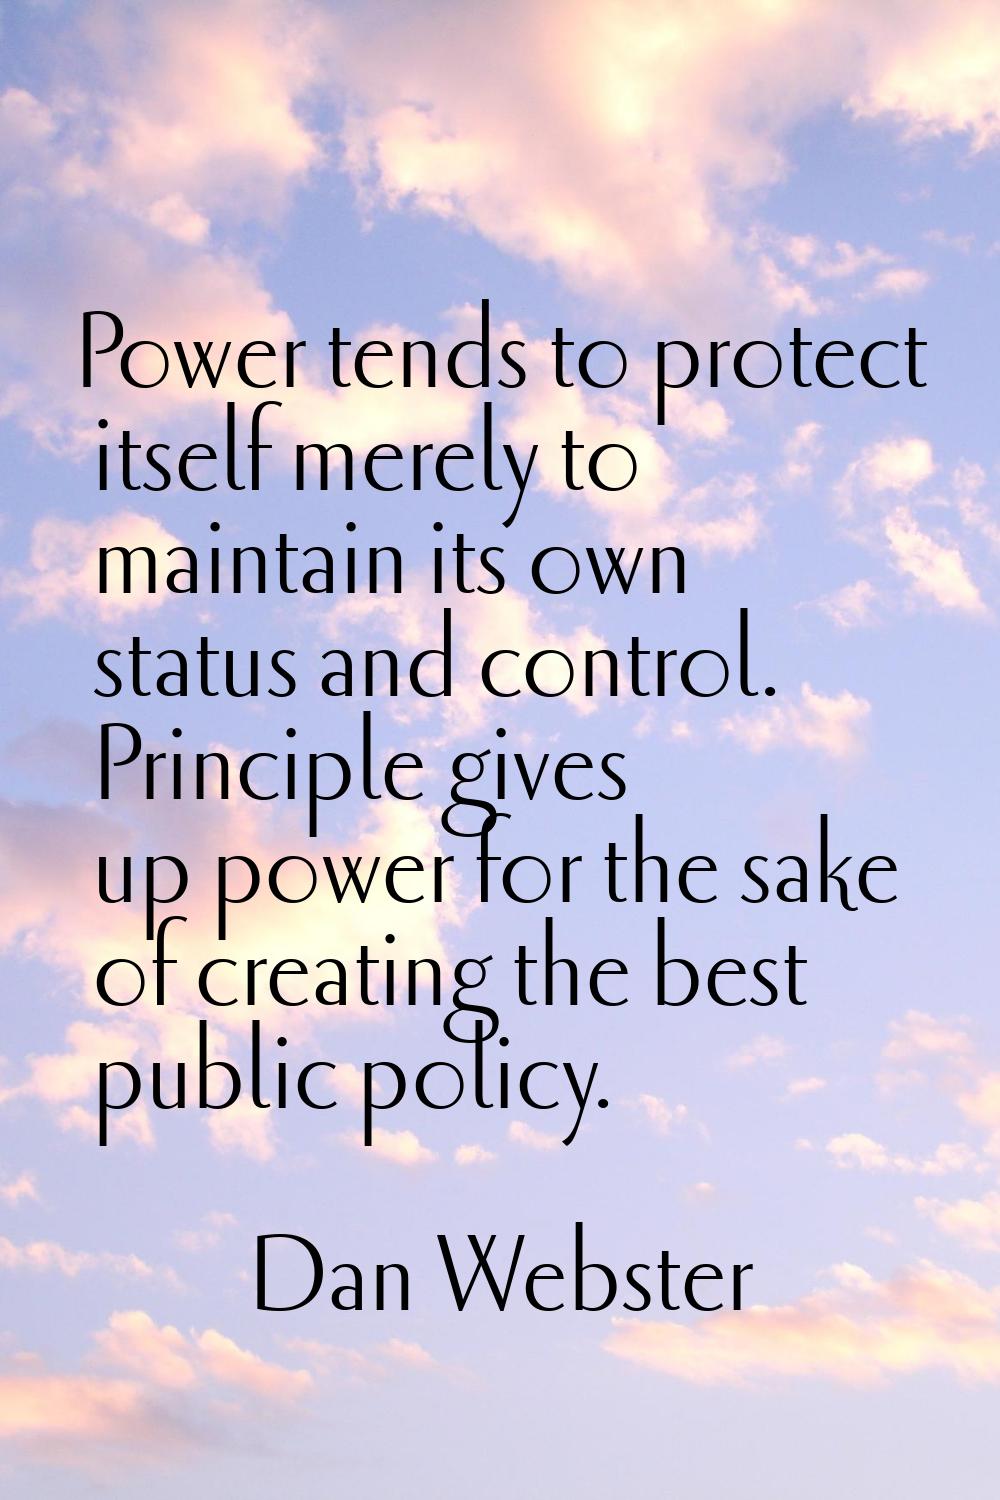 Power tends to protect itself merely to maintain its own status and control. Principle gives up pow